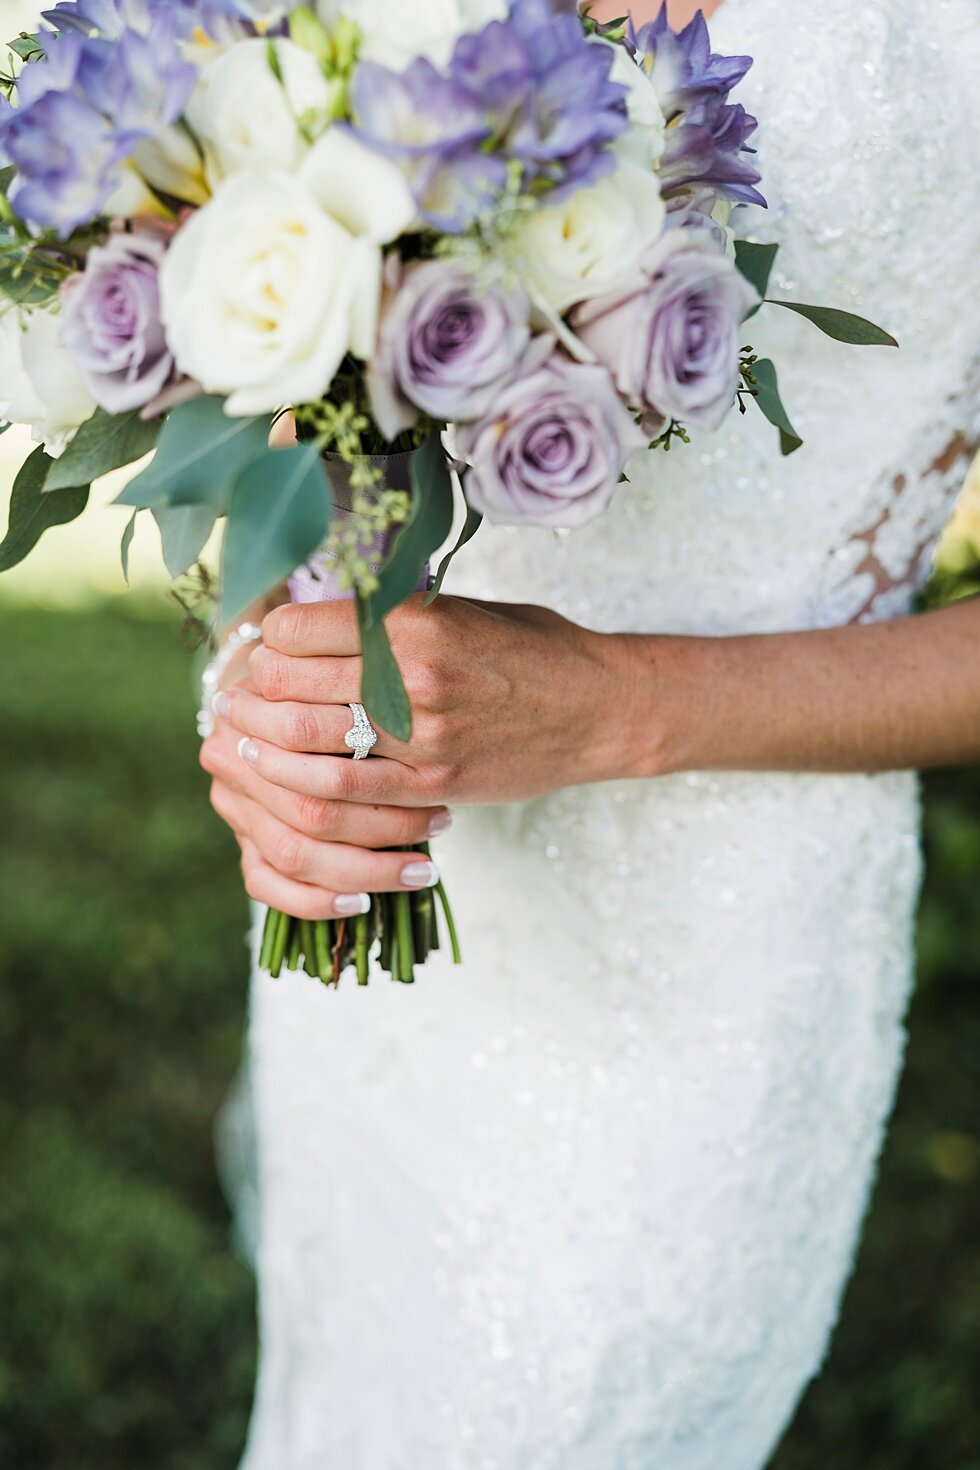  Close up of lavender bridal wedding bouquet, wedding ring and stunning wedding dress. wedding ceremony details stunning photography married midwest louisville kentucky #weddingphoto #love #justmarried #midwestphotographer #kywedding #louisville #ken